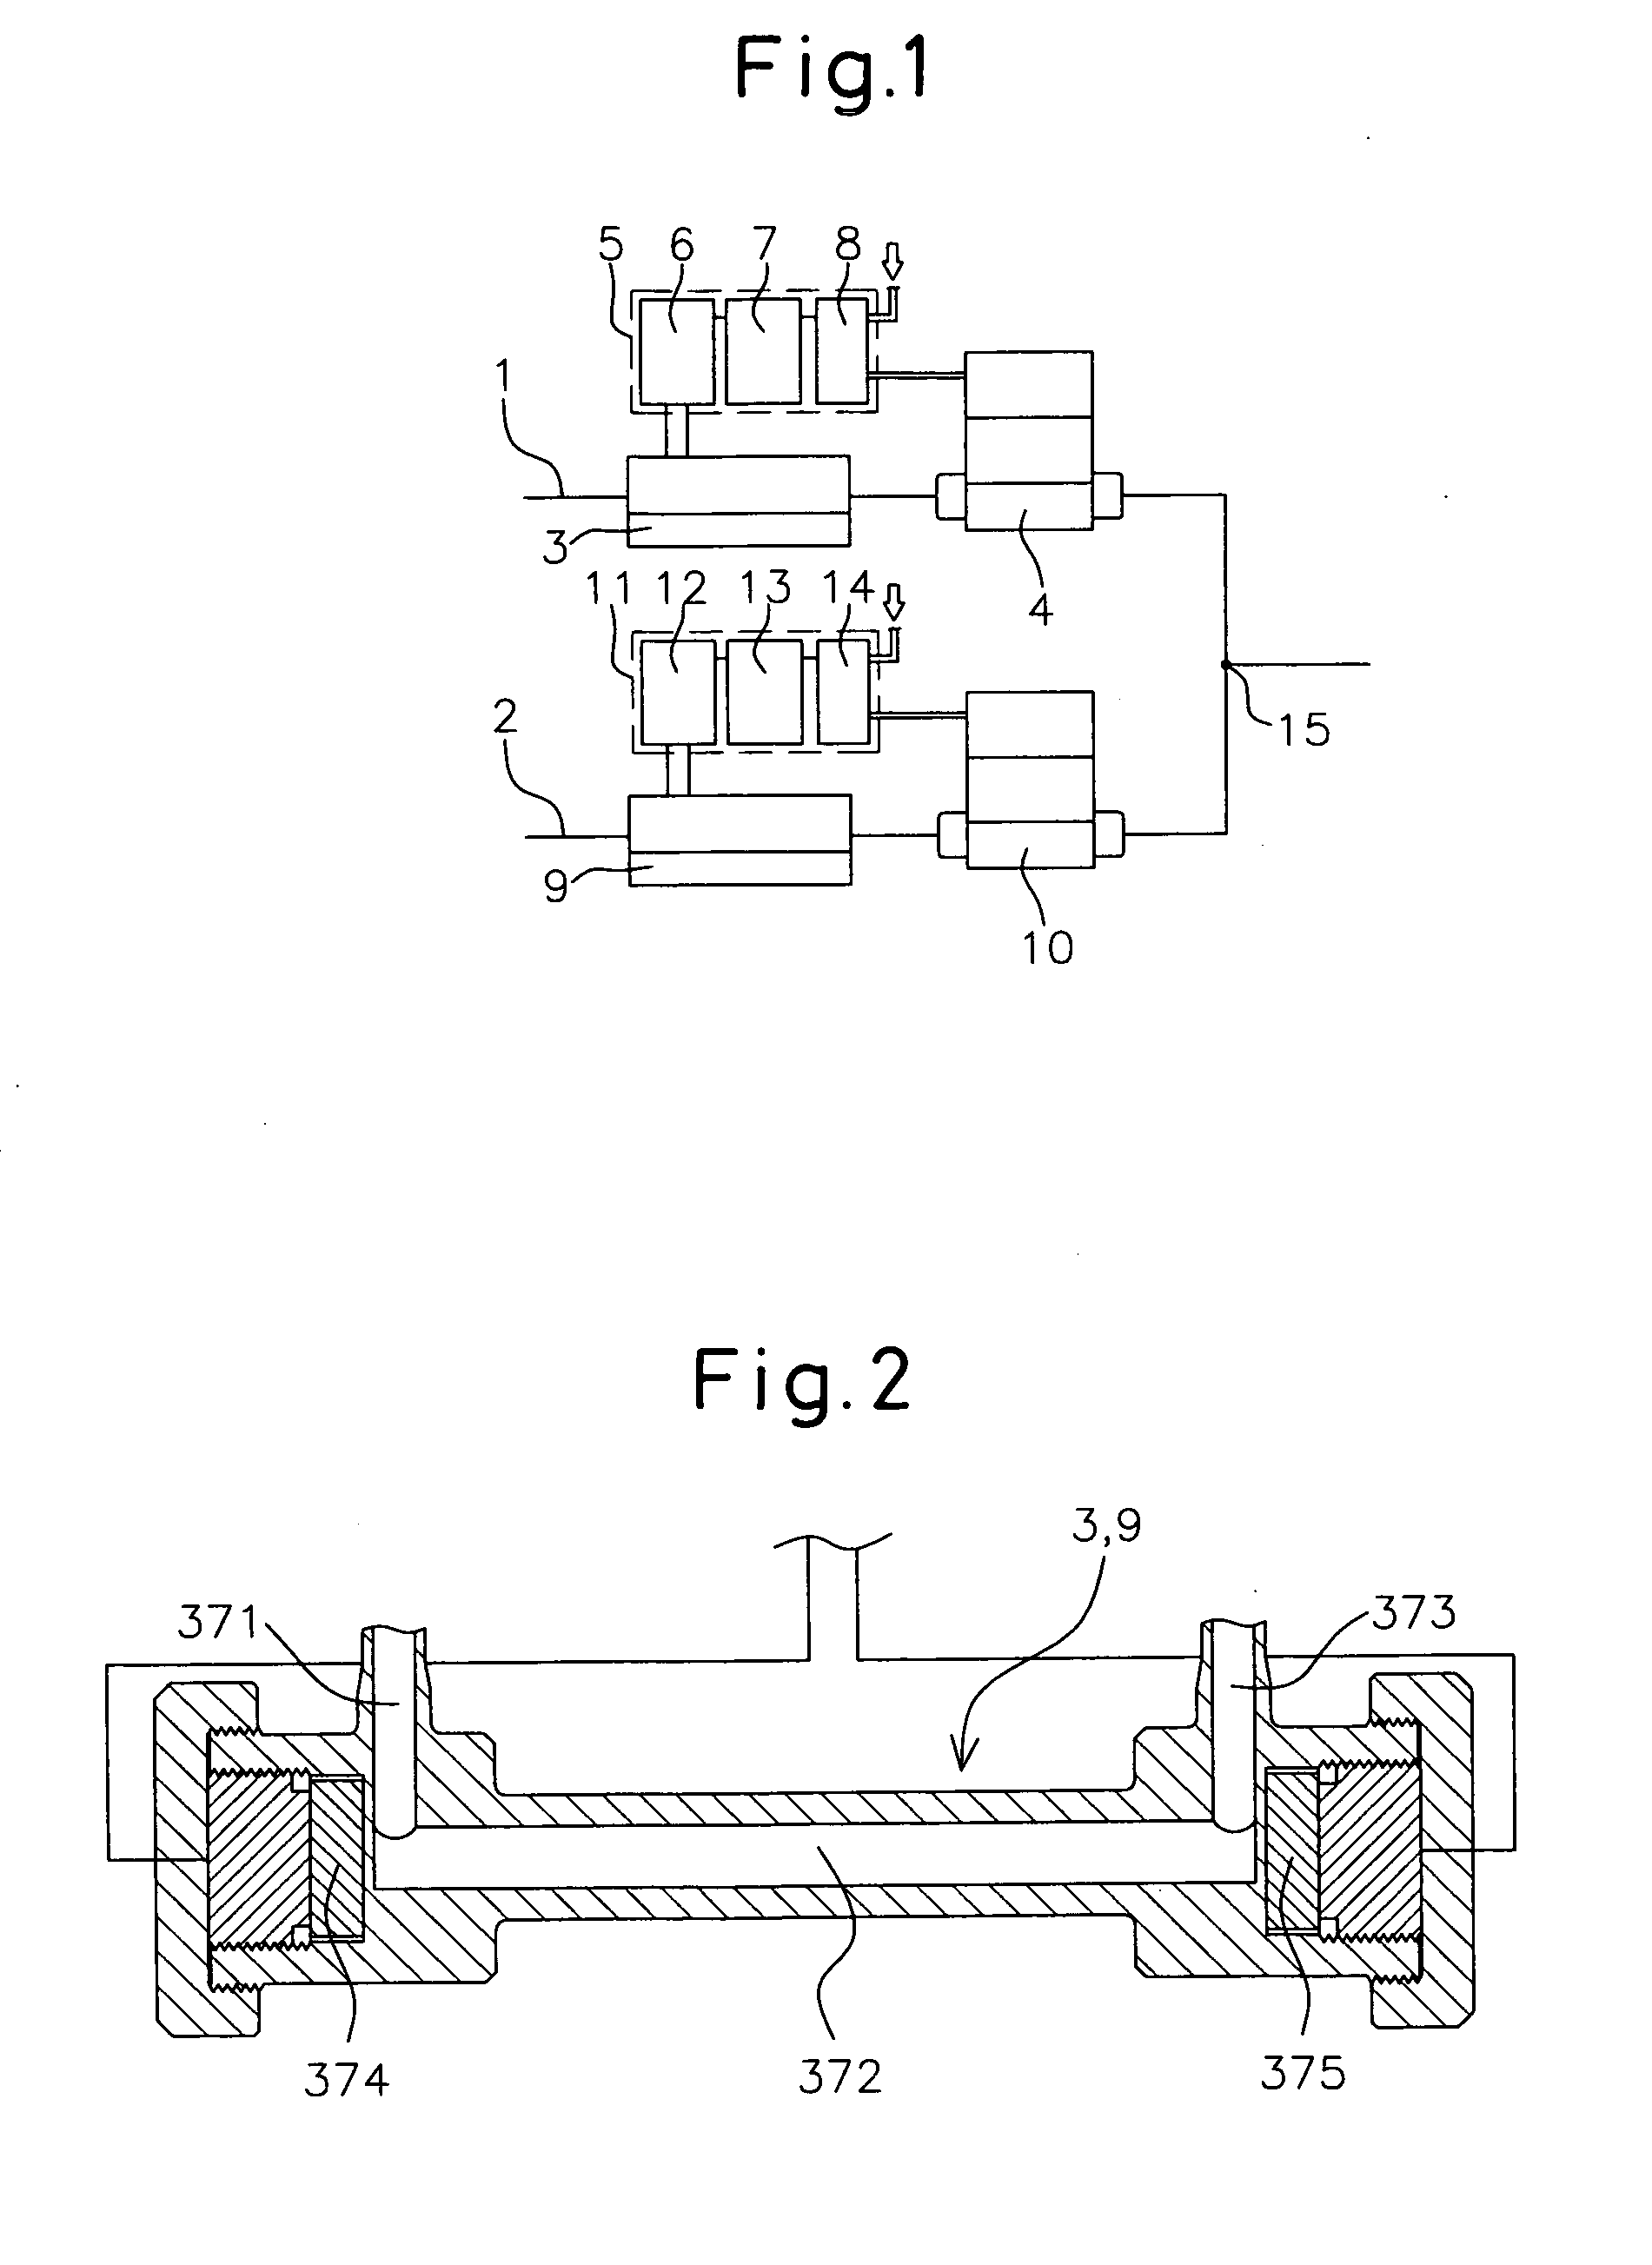 Fluid mixing system